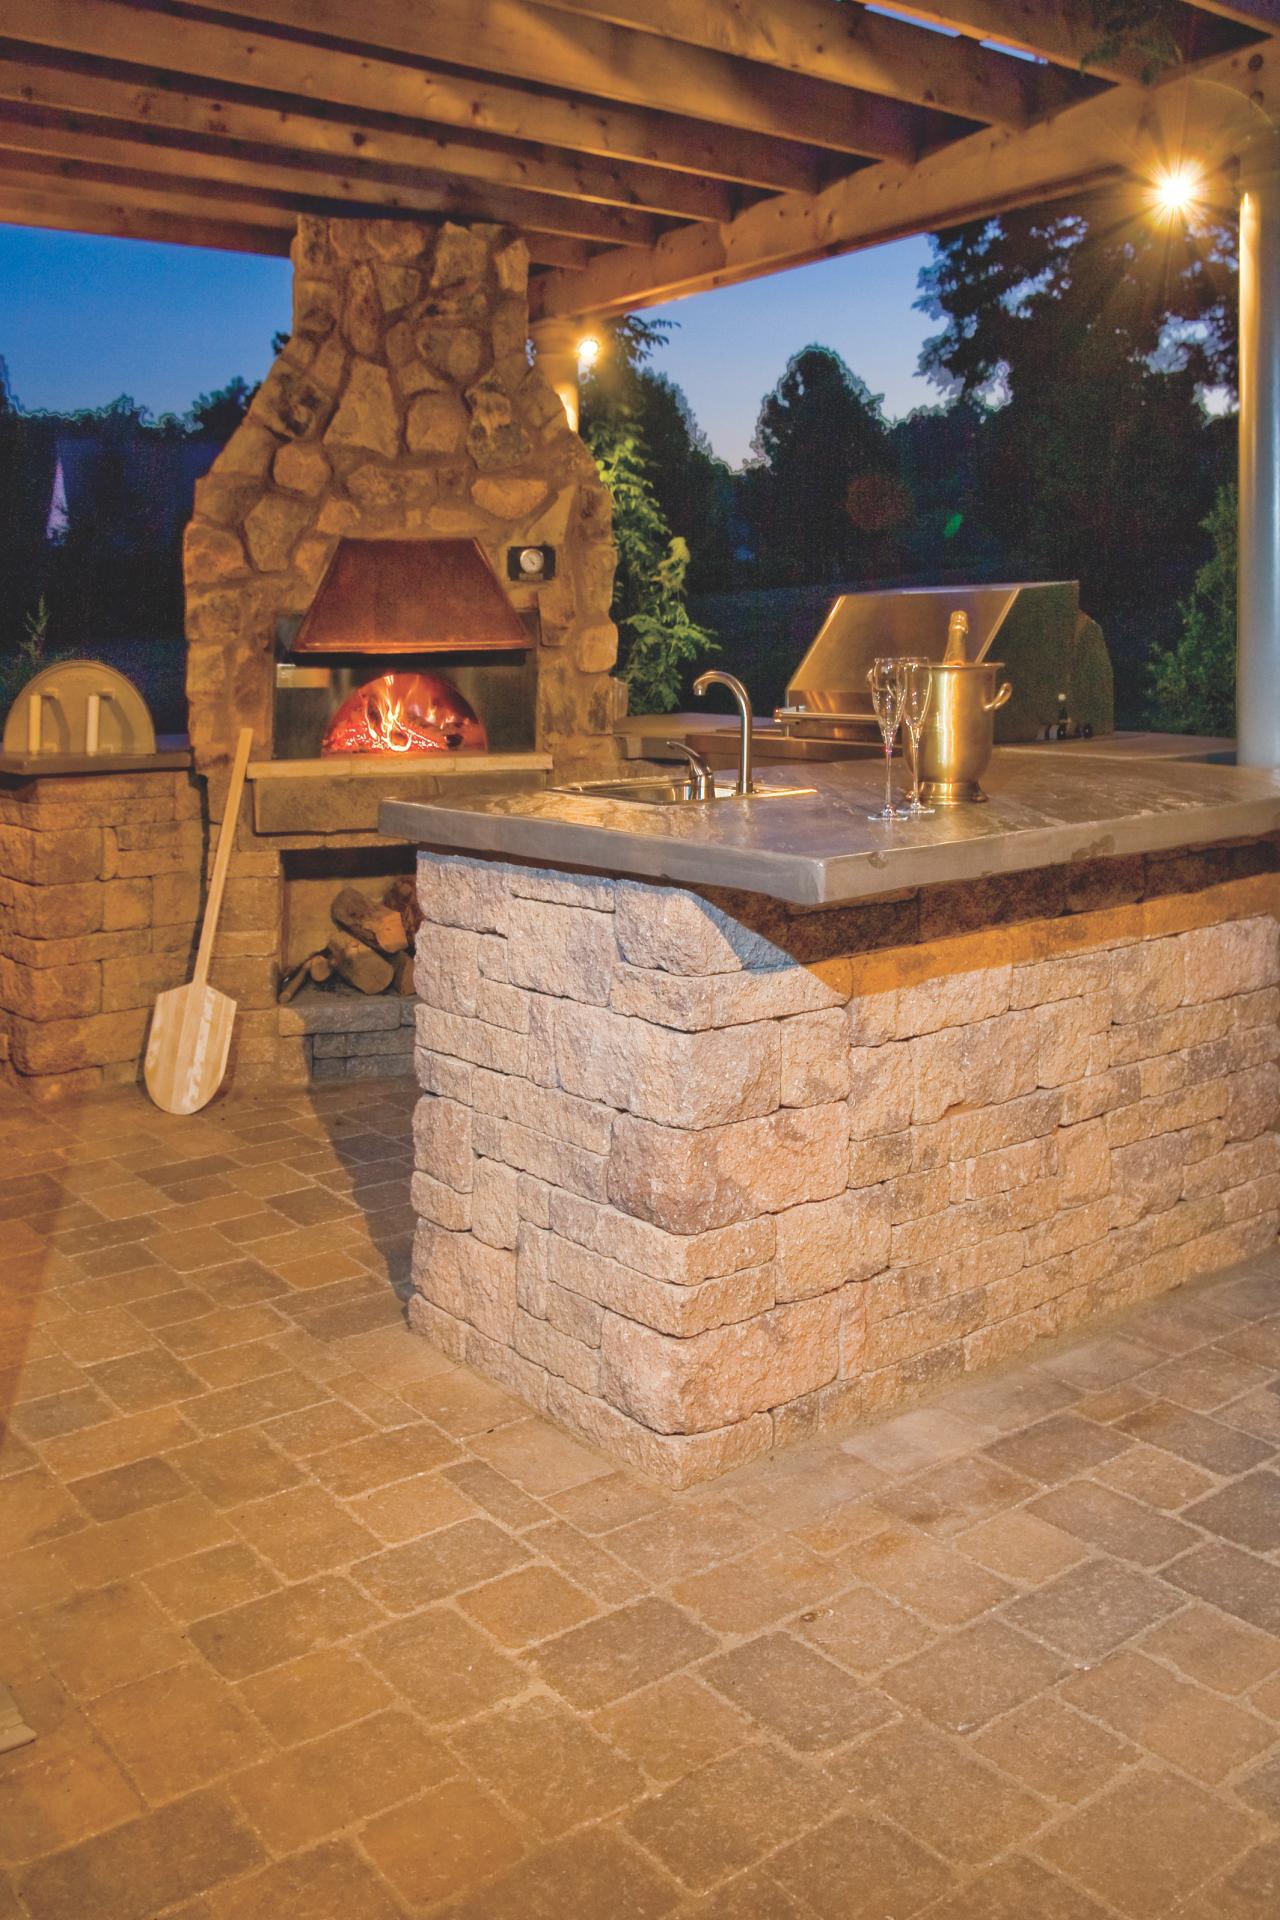 Outdoor Pizza Oven Fireplace Options, Outdoor Fireplace Pizza Oven Kit